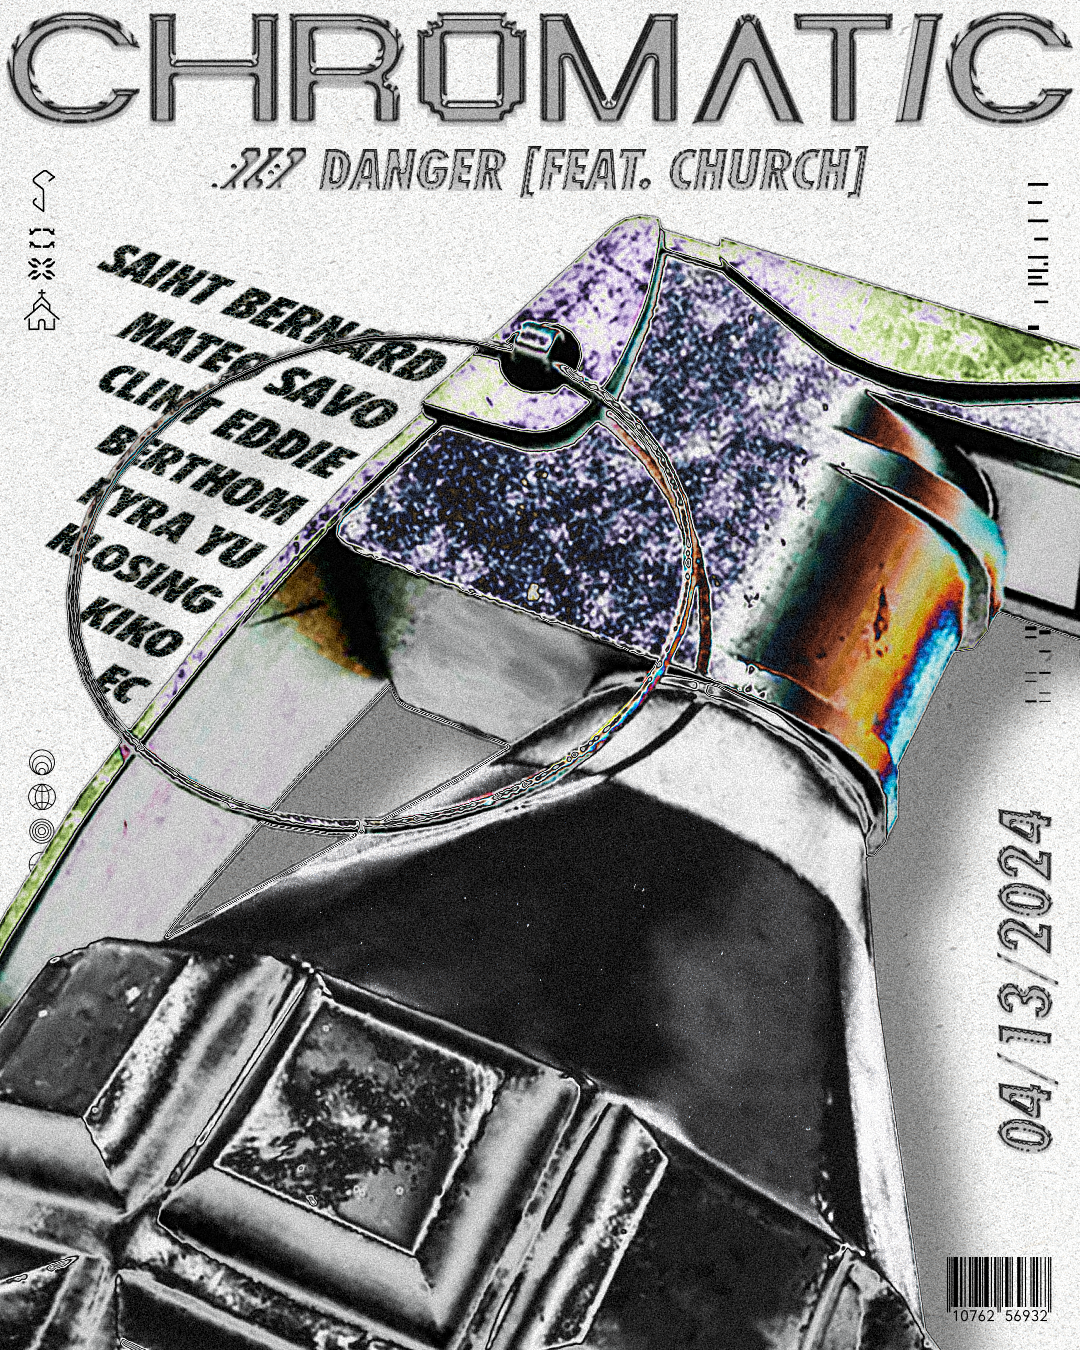 DANGER [Feat. Church] - Hosted by CHROMATIC - フライヤー表